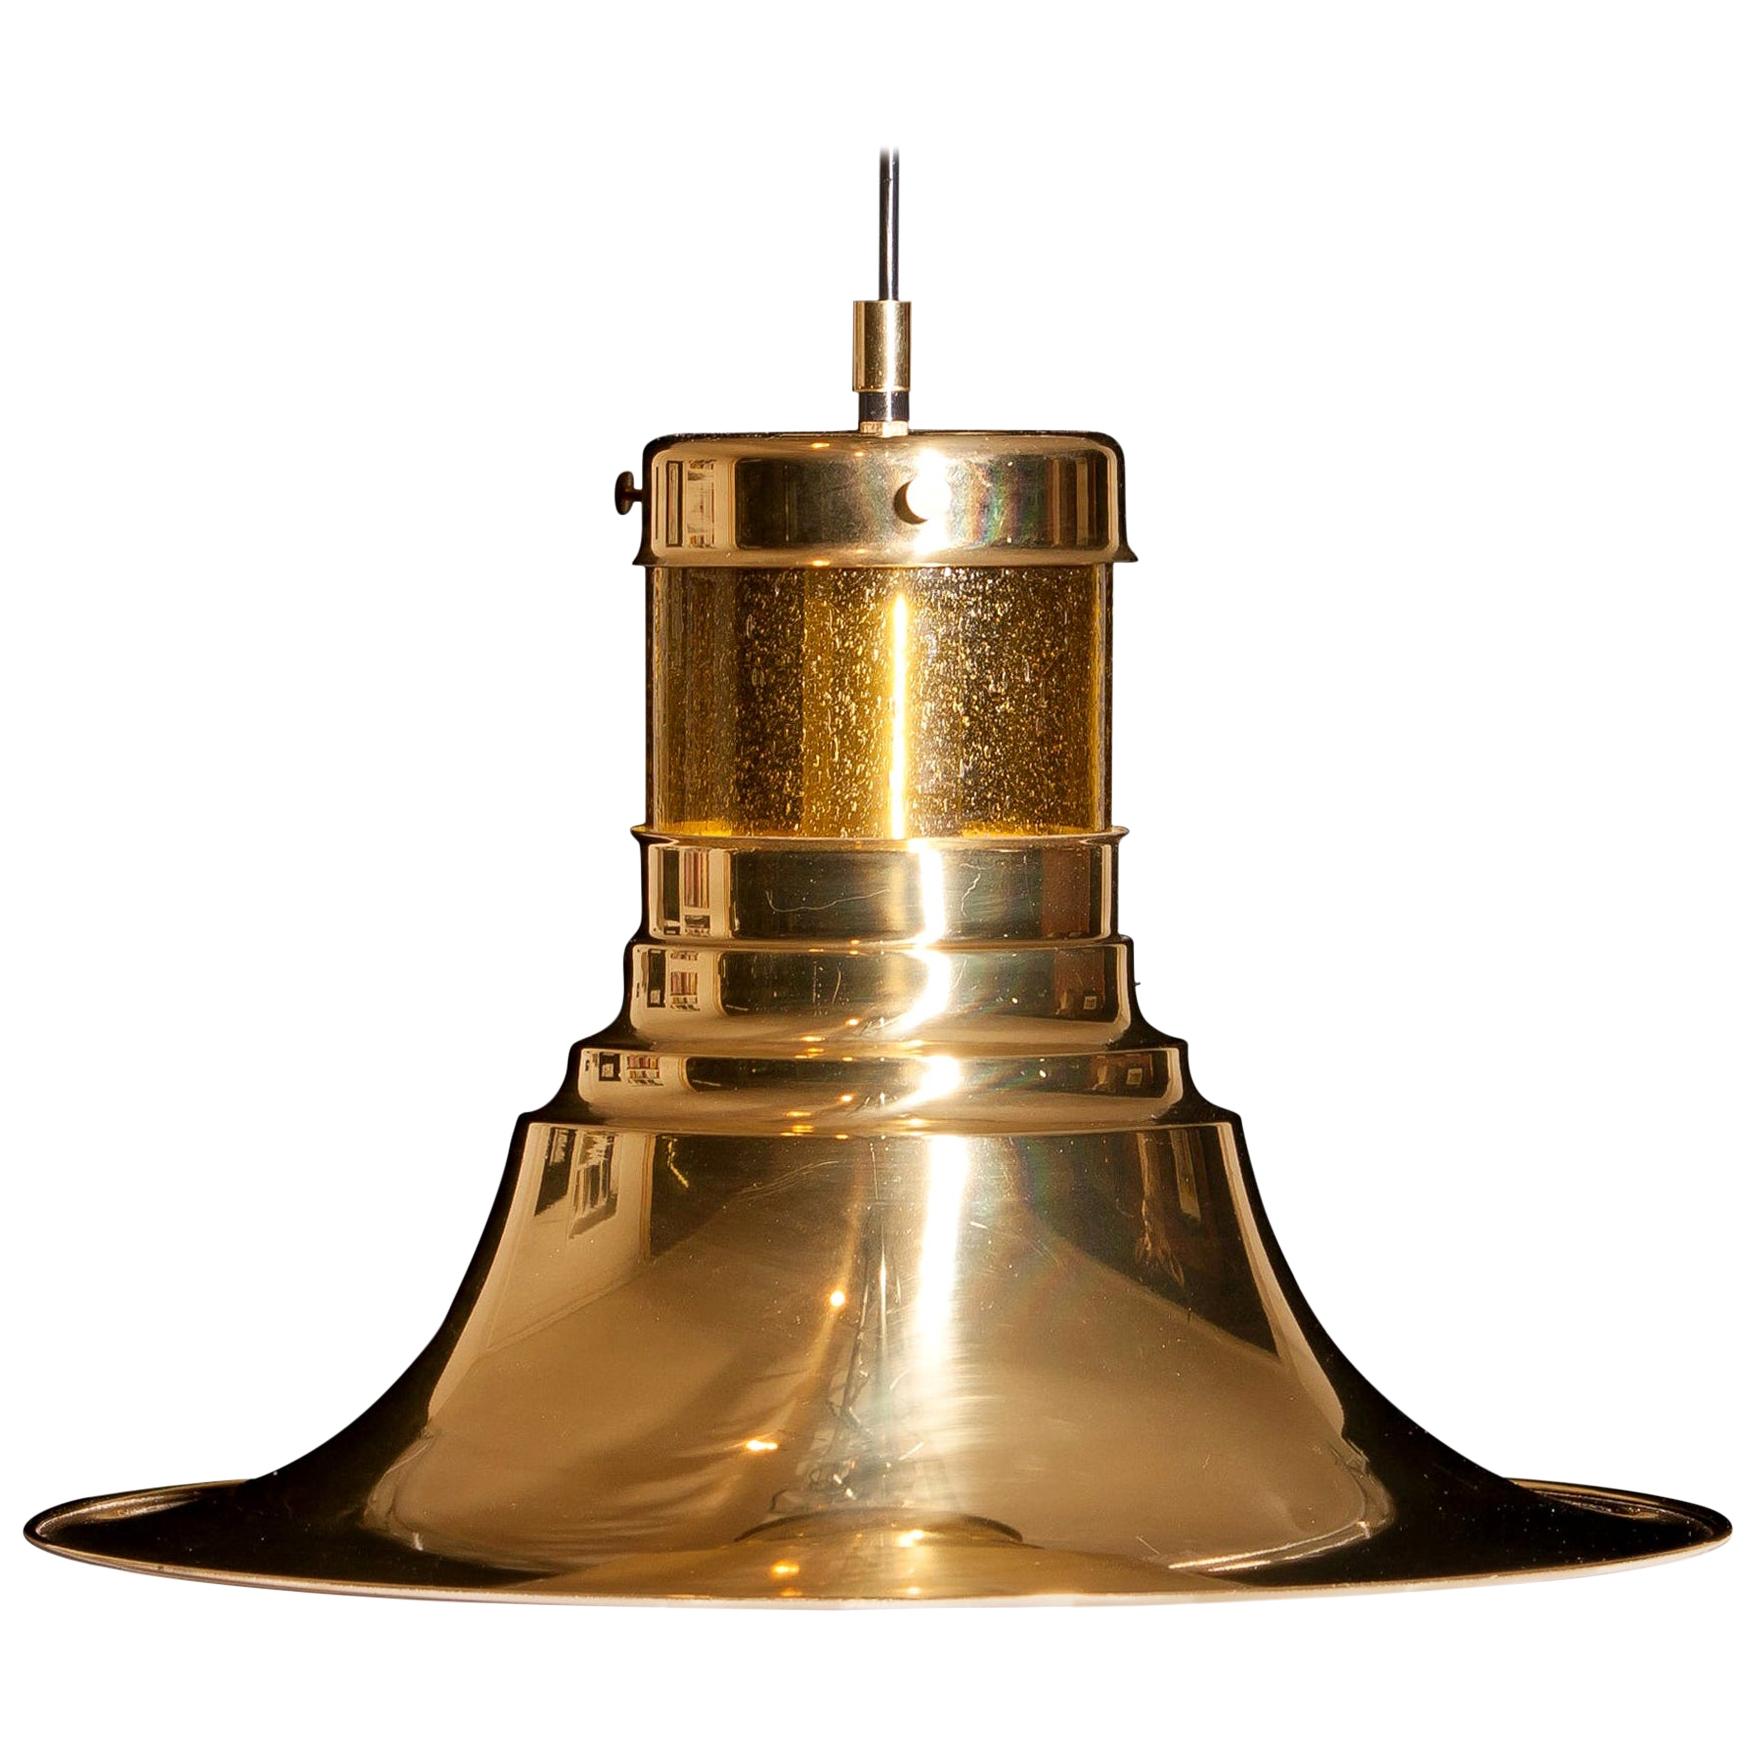 Magnificent pendant designed by Börje Claes for Norellet, Sweden.
This lamp is made of brass with an enamel white inside and a yellow cylinder of glass.
The beautiful shape makes that it gives a wonderful shining.
Period: 1970s.
Dimensions: H 32